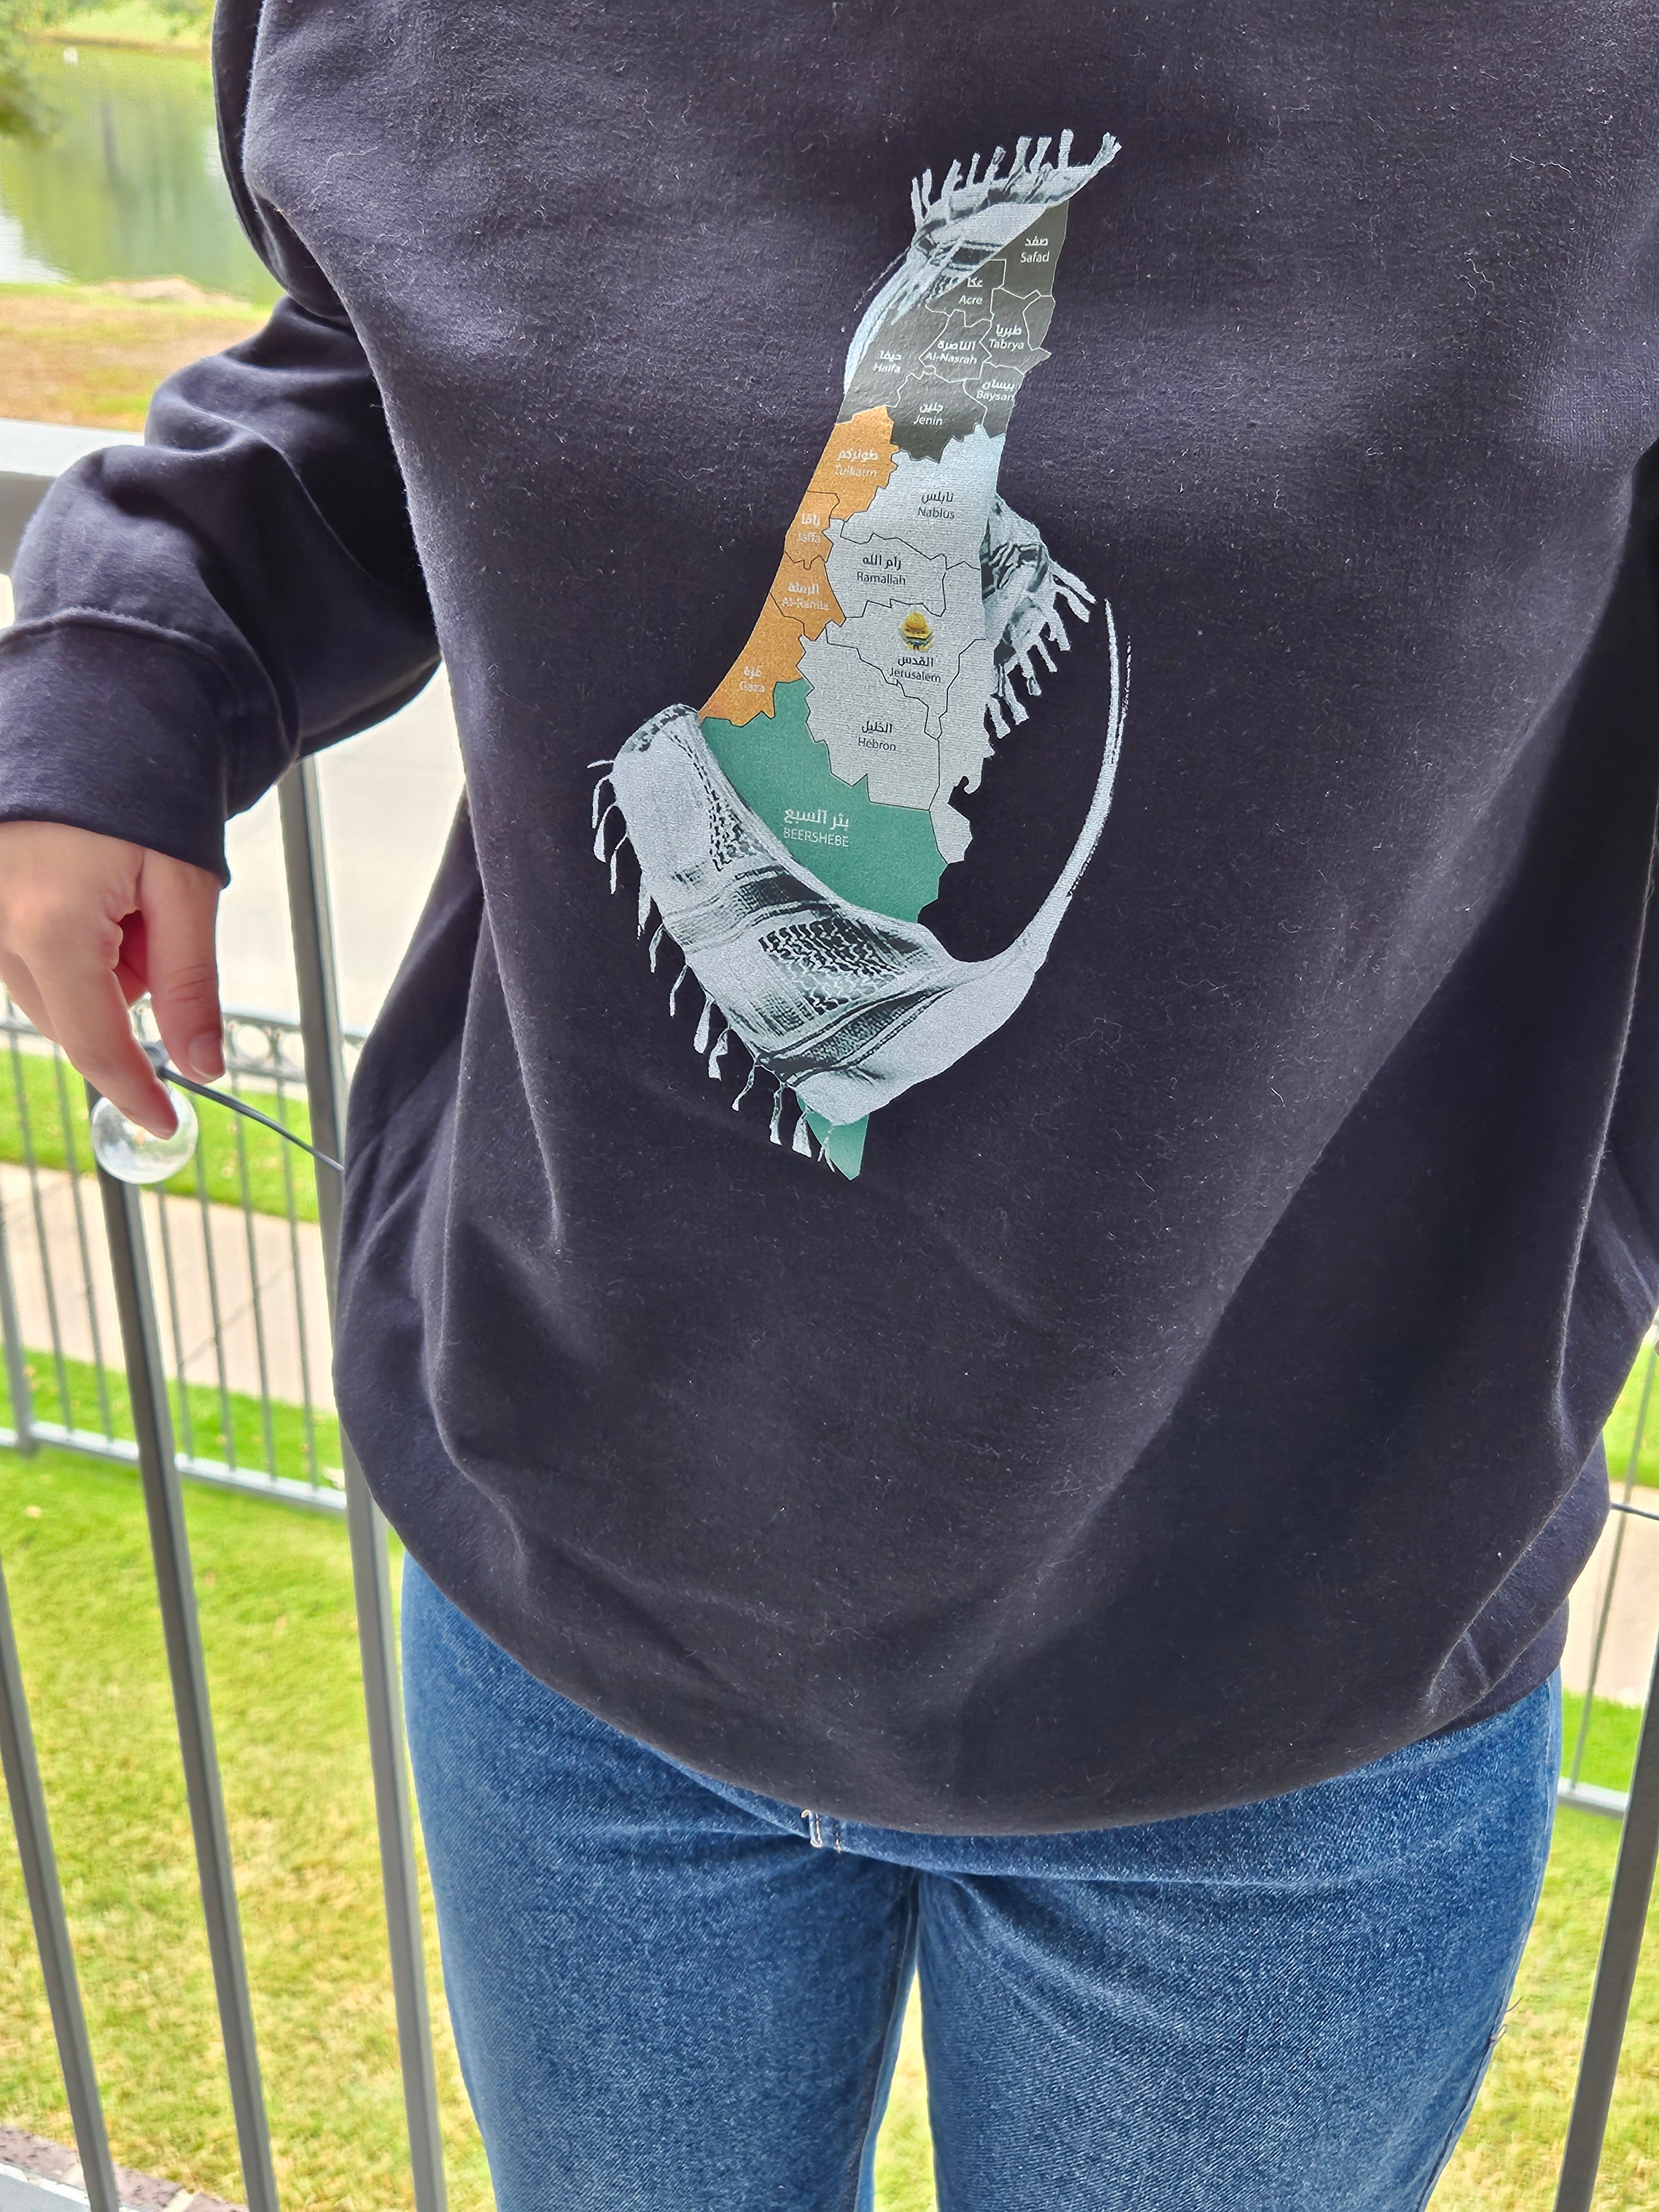 Palestine Map with Cities / Villages Hoodie, Long sleeve, or Crew Neck - Kids & Adult sizes - Habibi Heritage